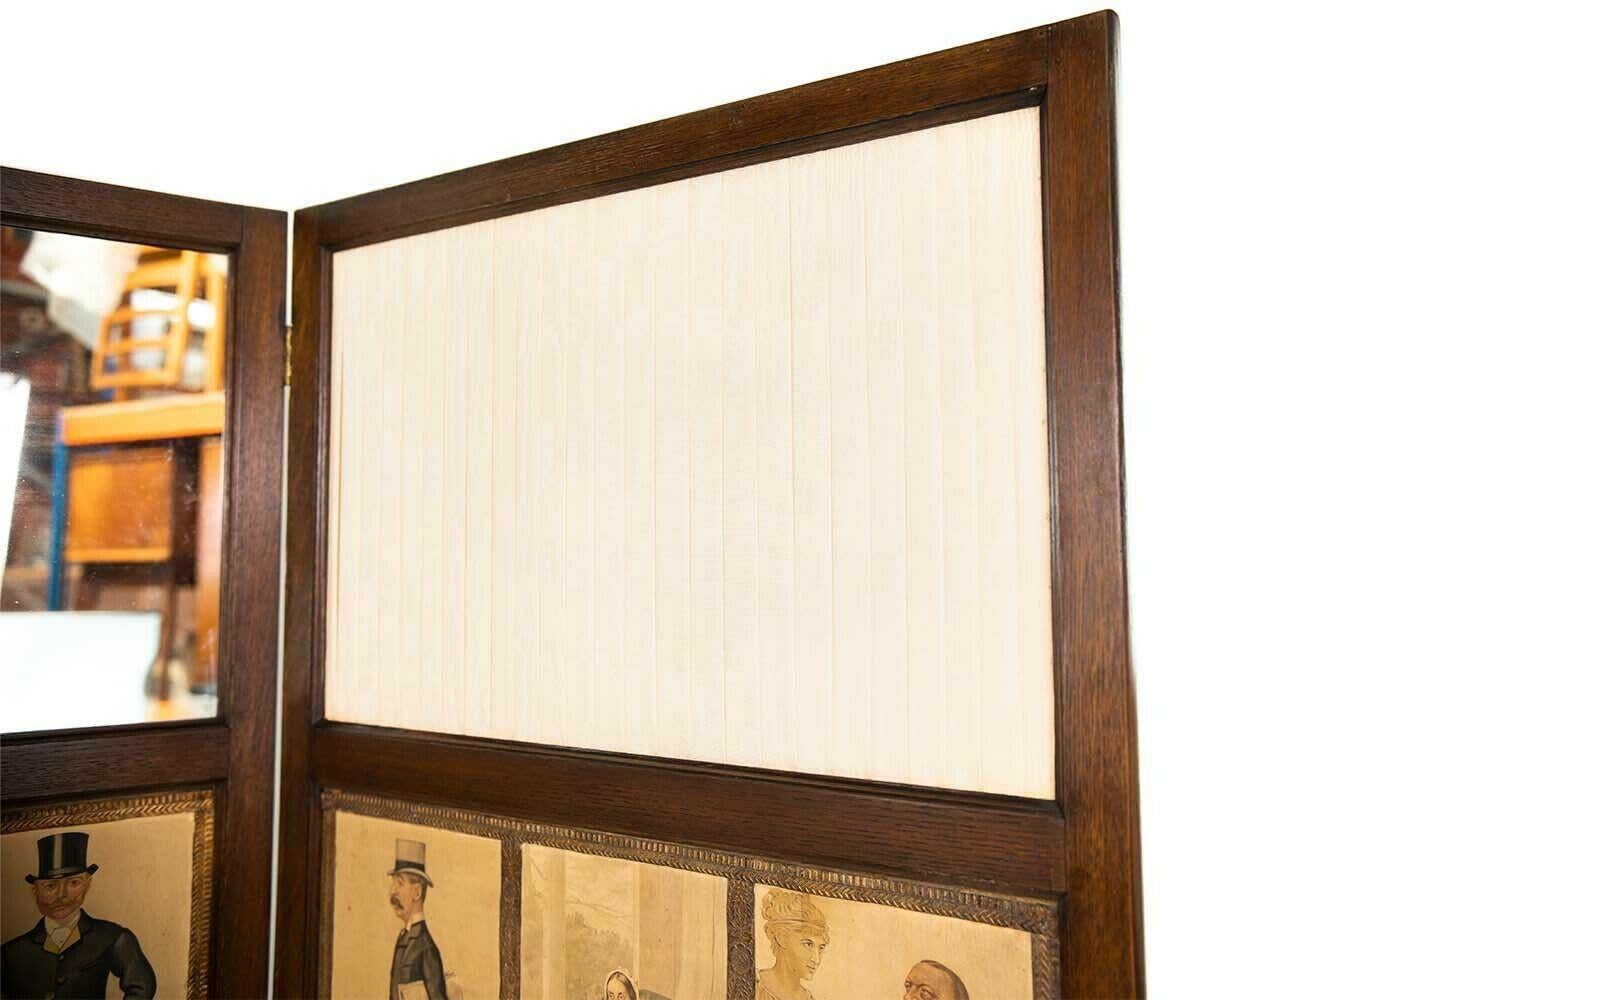 Three fold screen

Edwardian panelled room divider screen featuring Leslie Matthew Ward “Spy” prints 

A circa 1910 Edwardian Mahogany folding screen or room divider is offered for sale. The panels are decorated with “Spy” and similar caricature